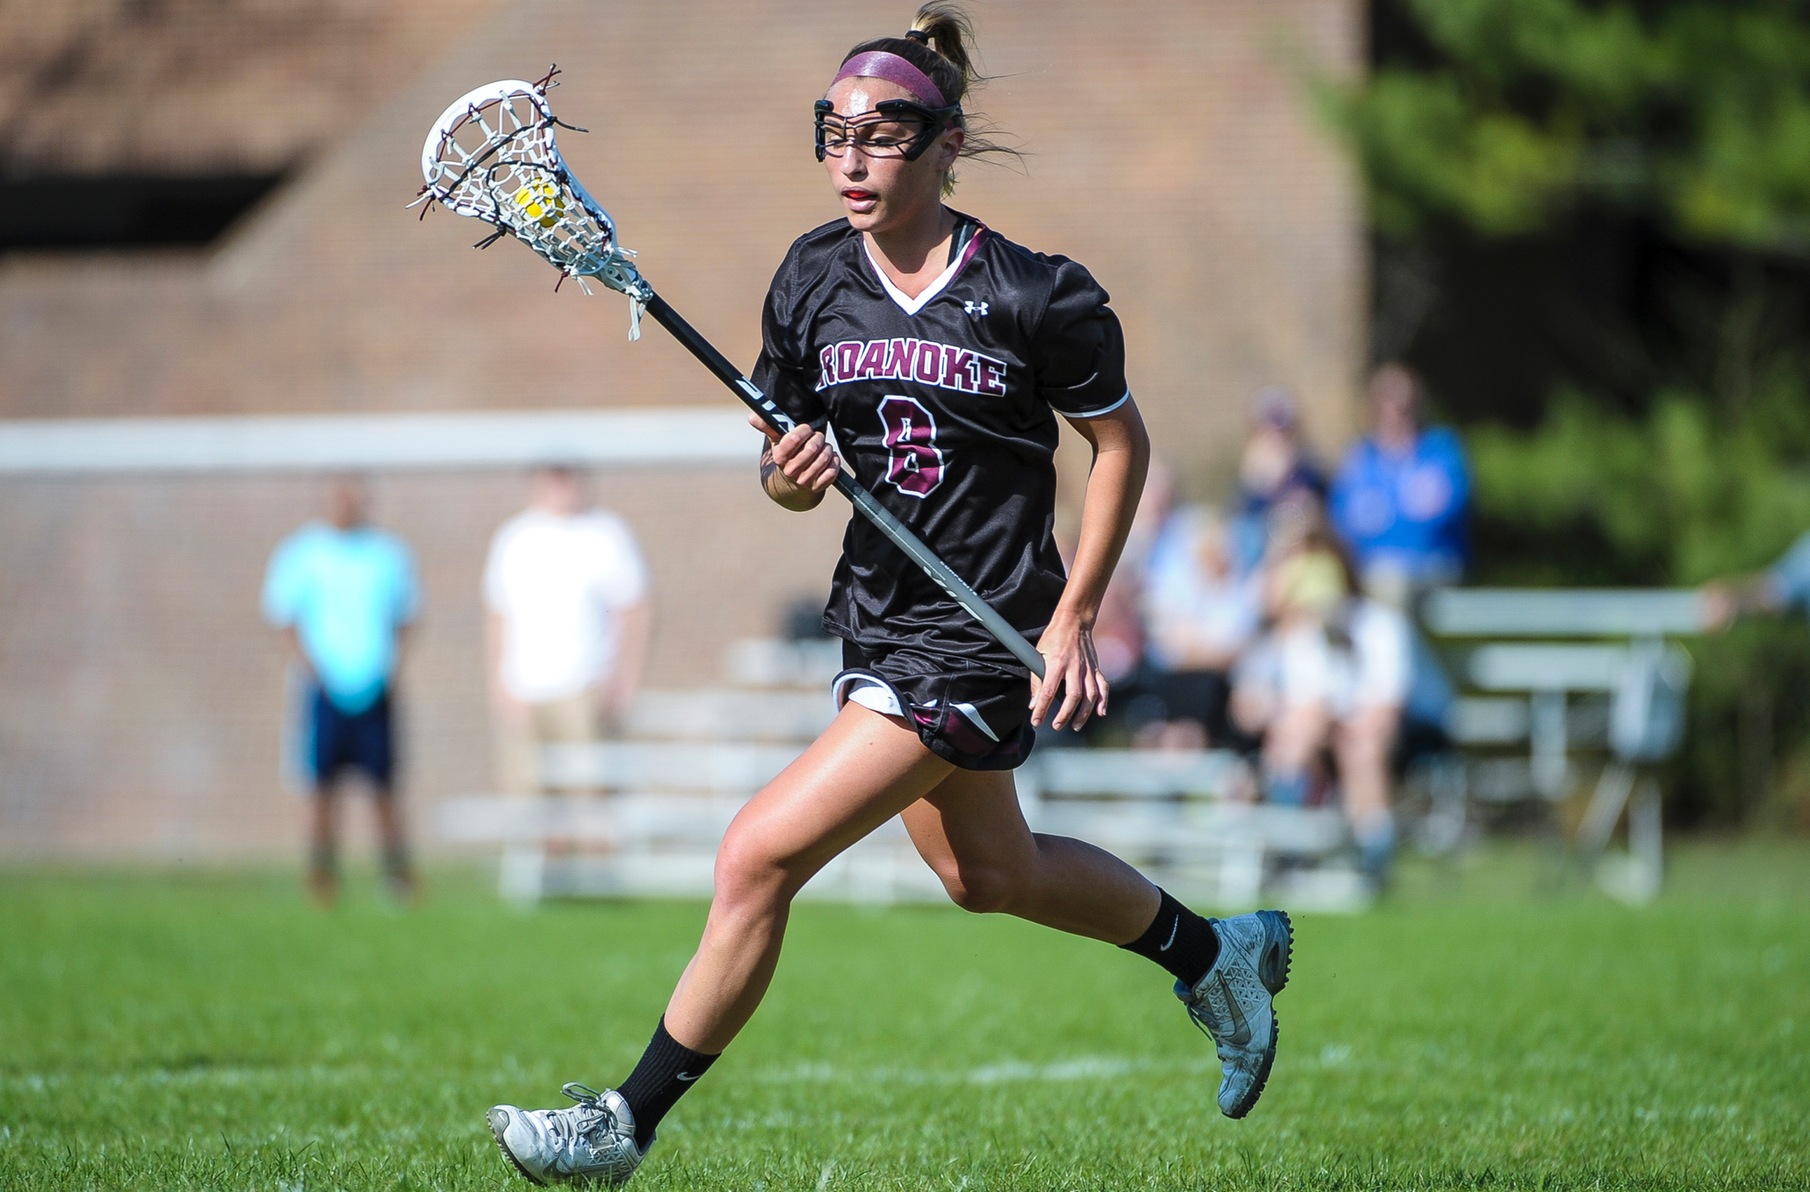 Haverford Holds Off Roanoke Women's Lax 12-8